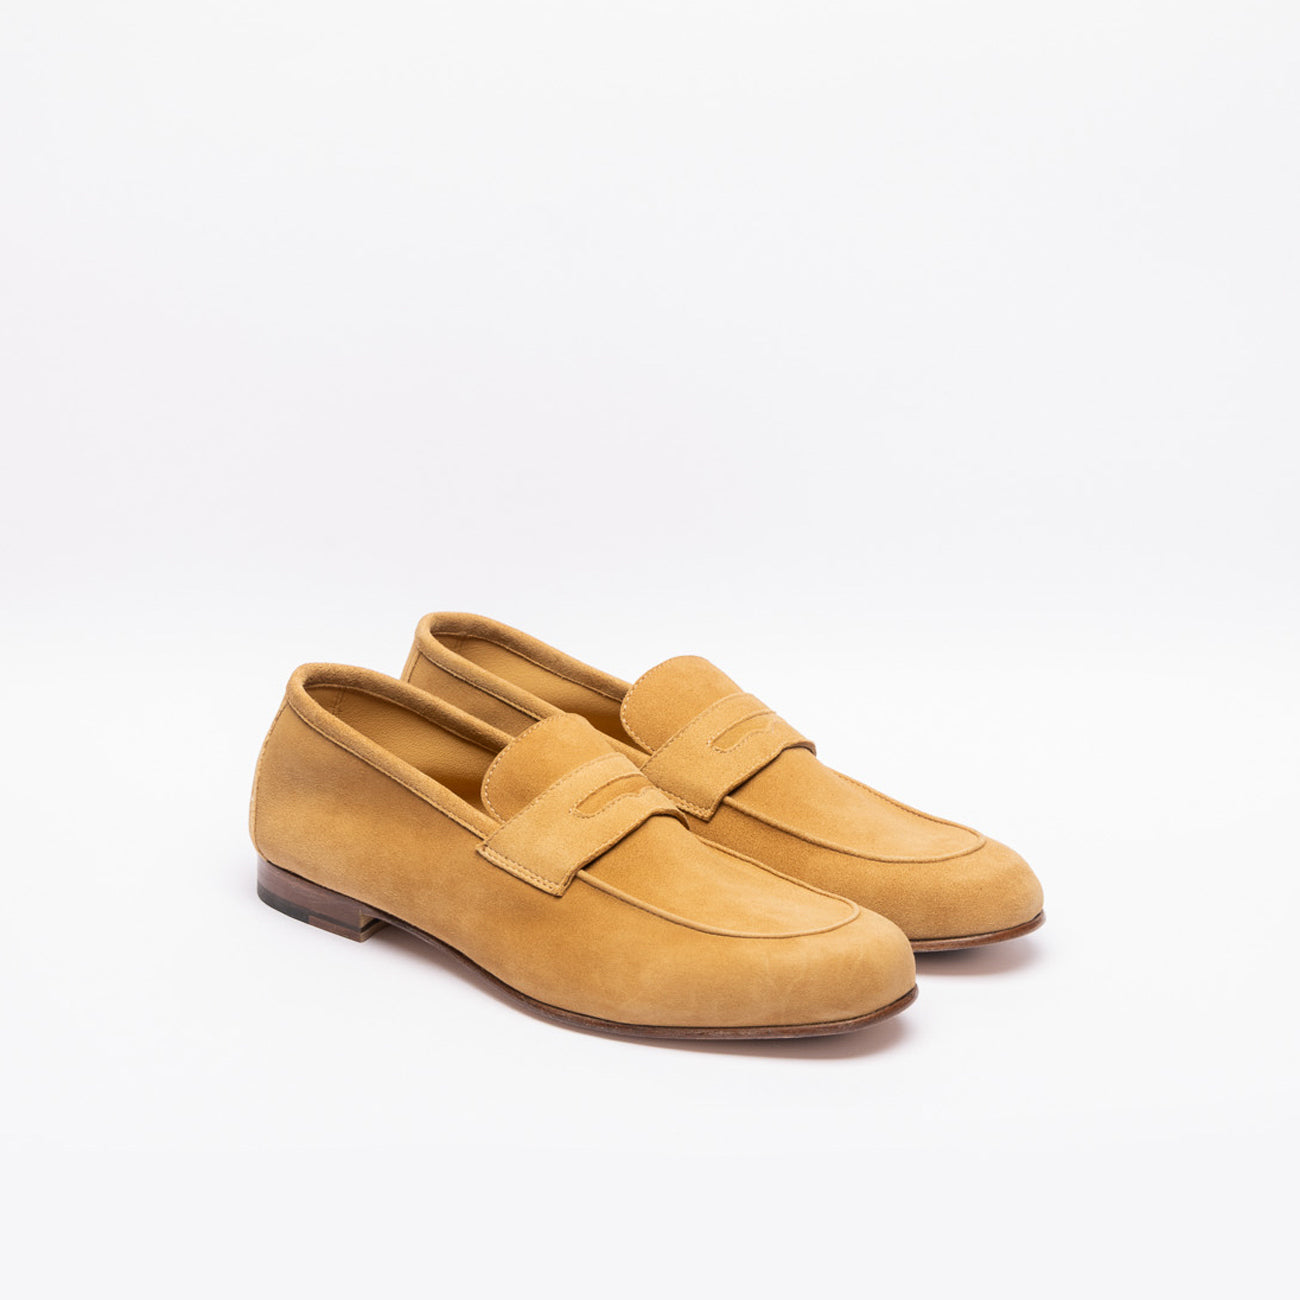 The unlined penny loafer Tasca BL in cognac suede